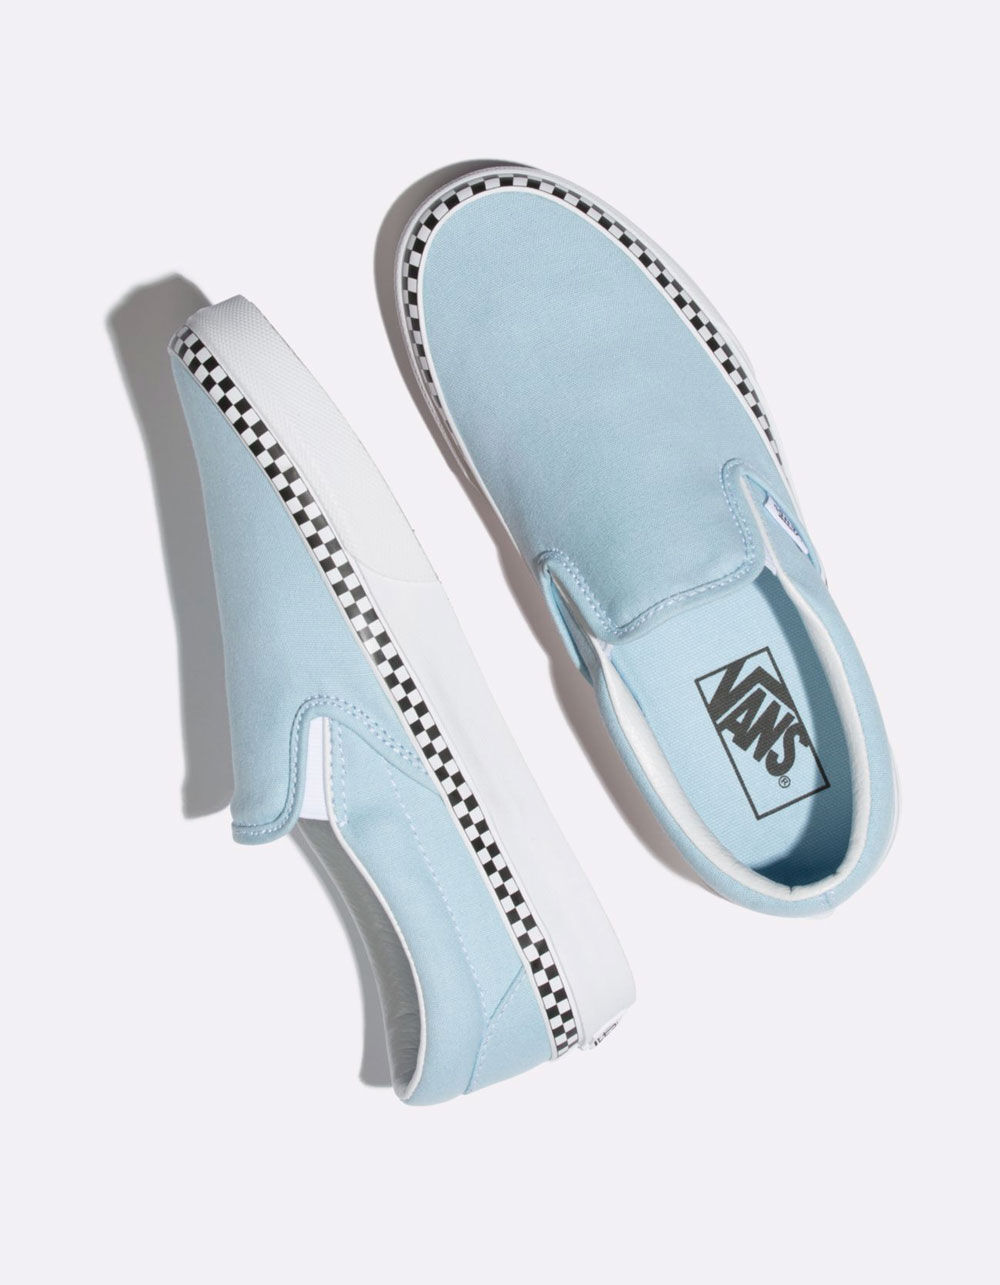 VANS Check Foxing Classic Slip-On Cool Blue & True White Womens Shoes ...